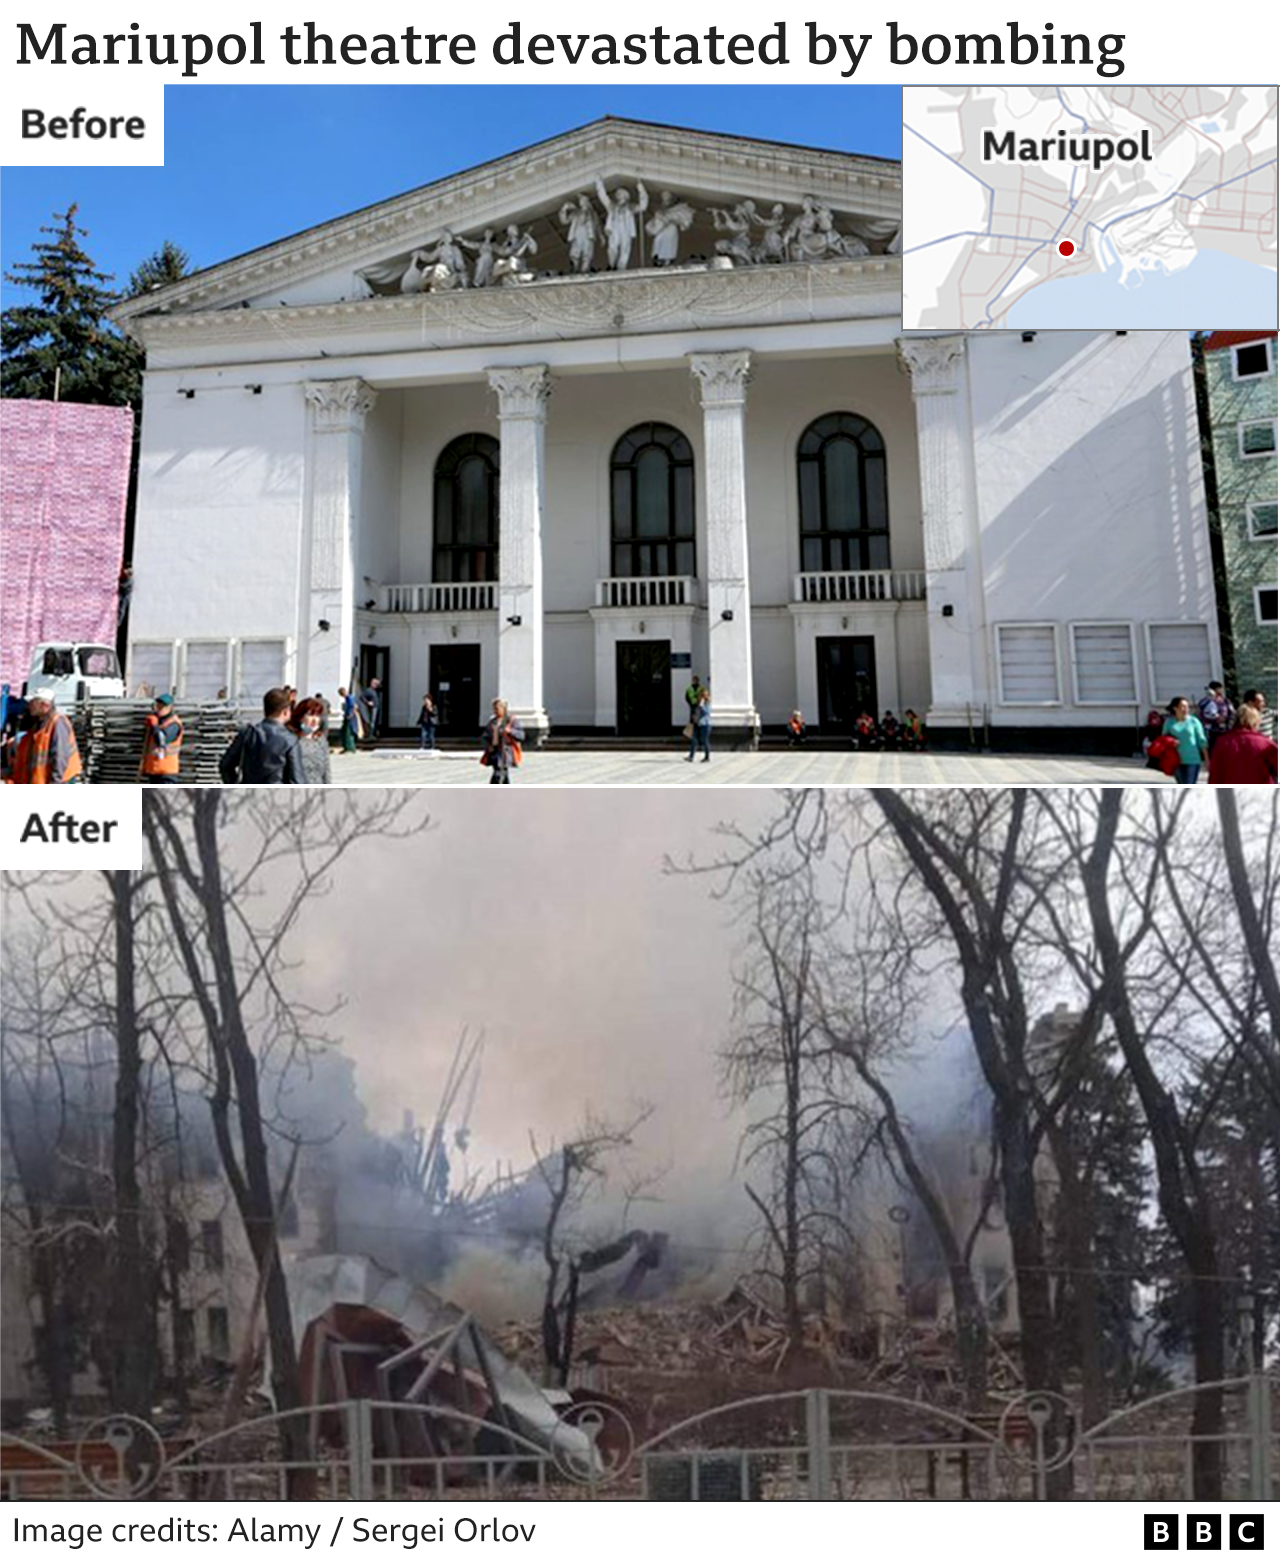 Image shows before and after the attack